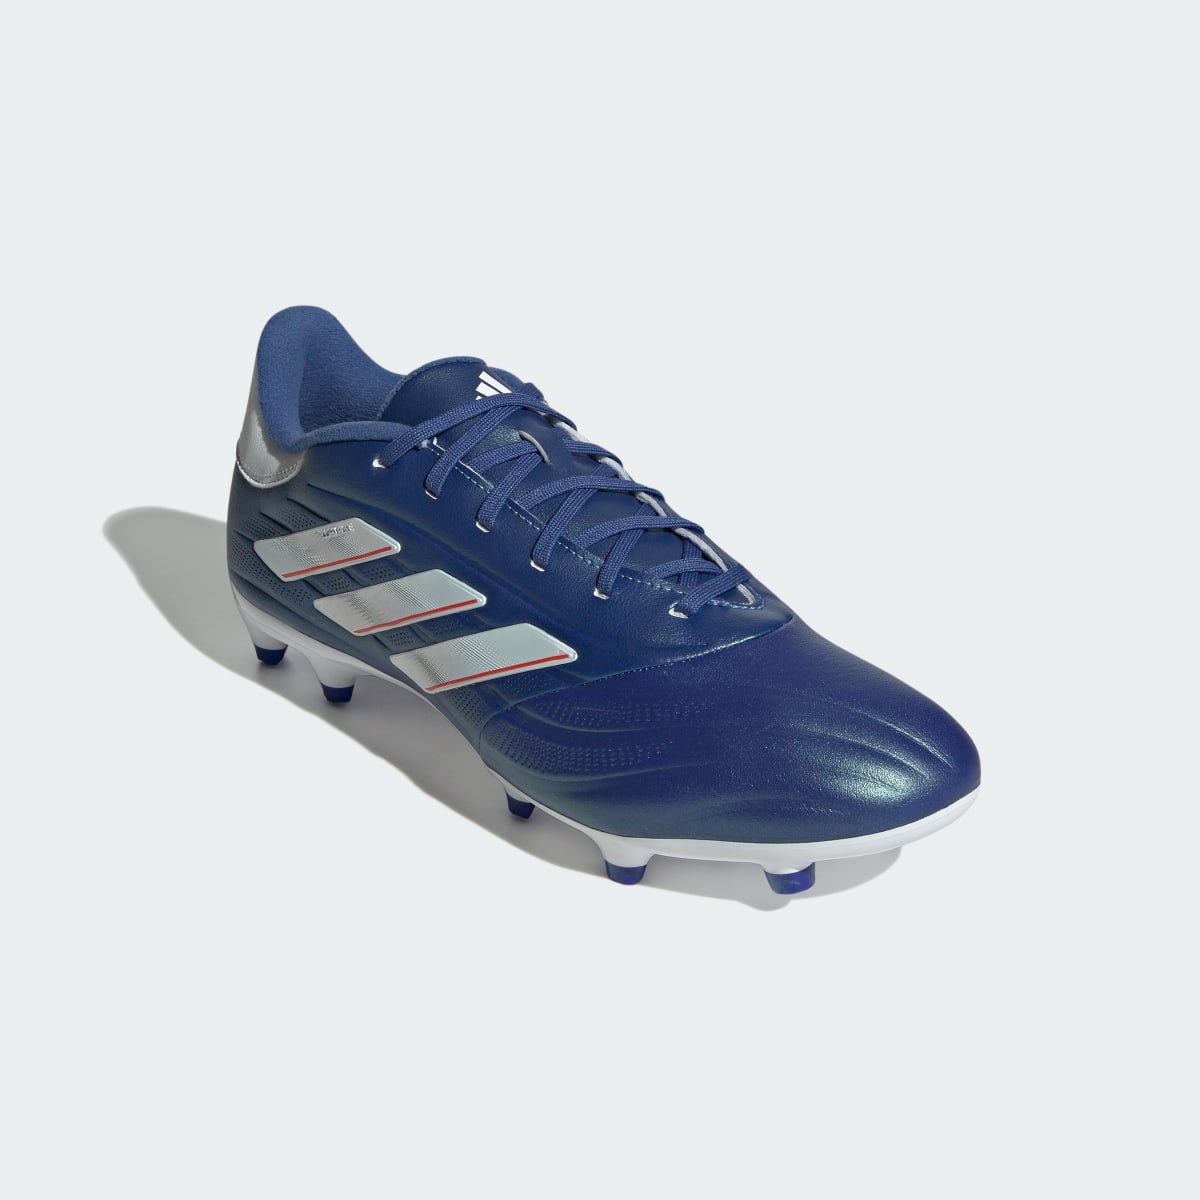 Adidas Copa Pure II.3 Firm Ground Boots. 5